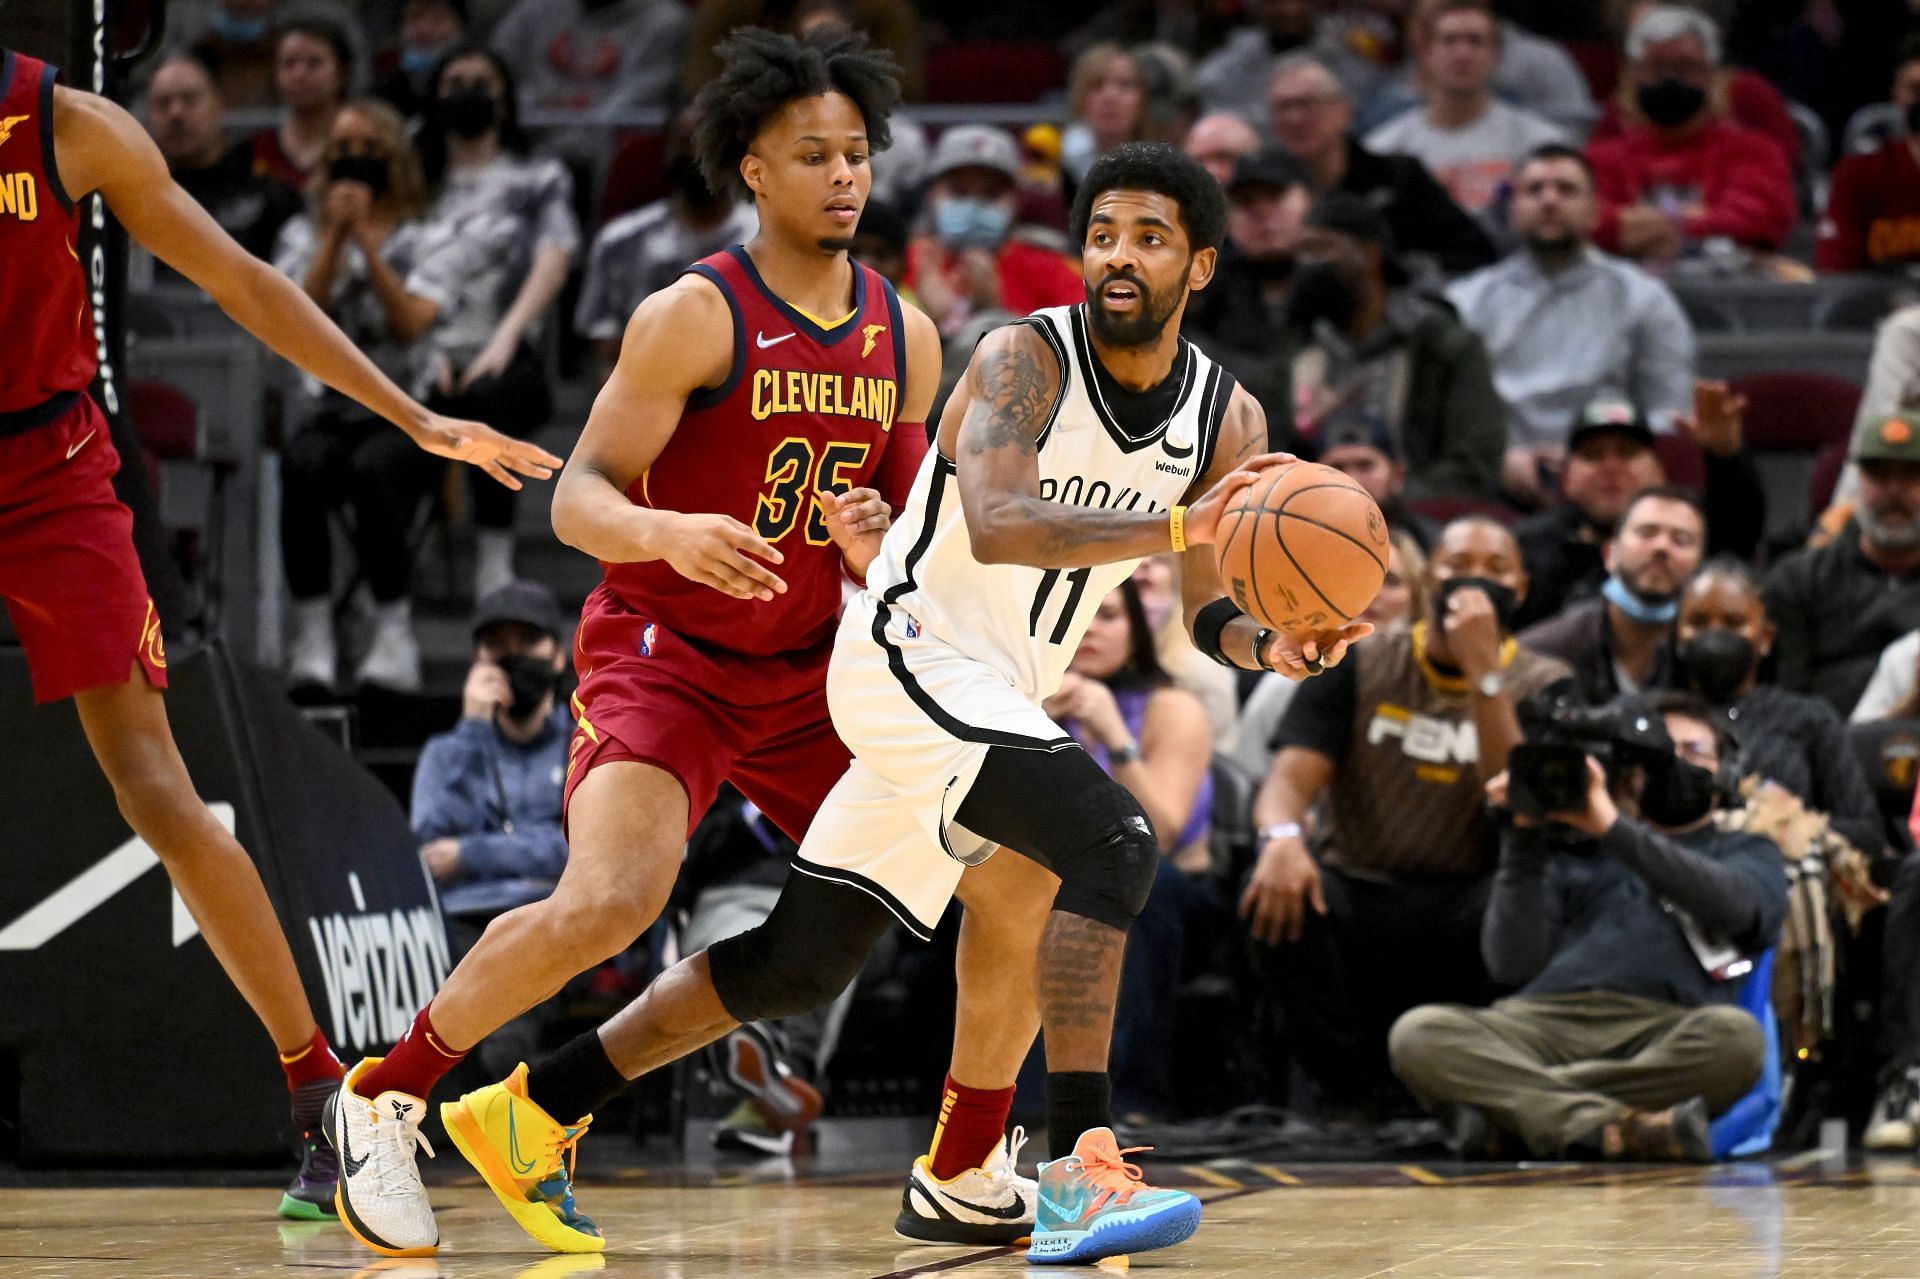 The Brooklyn Nets will host the Cleveland Cavaliers in a crucial clash on April 8